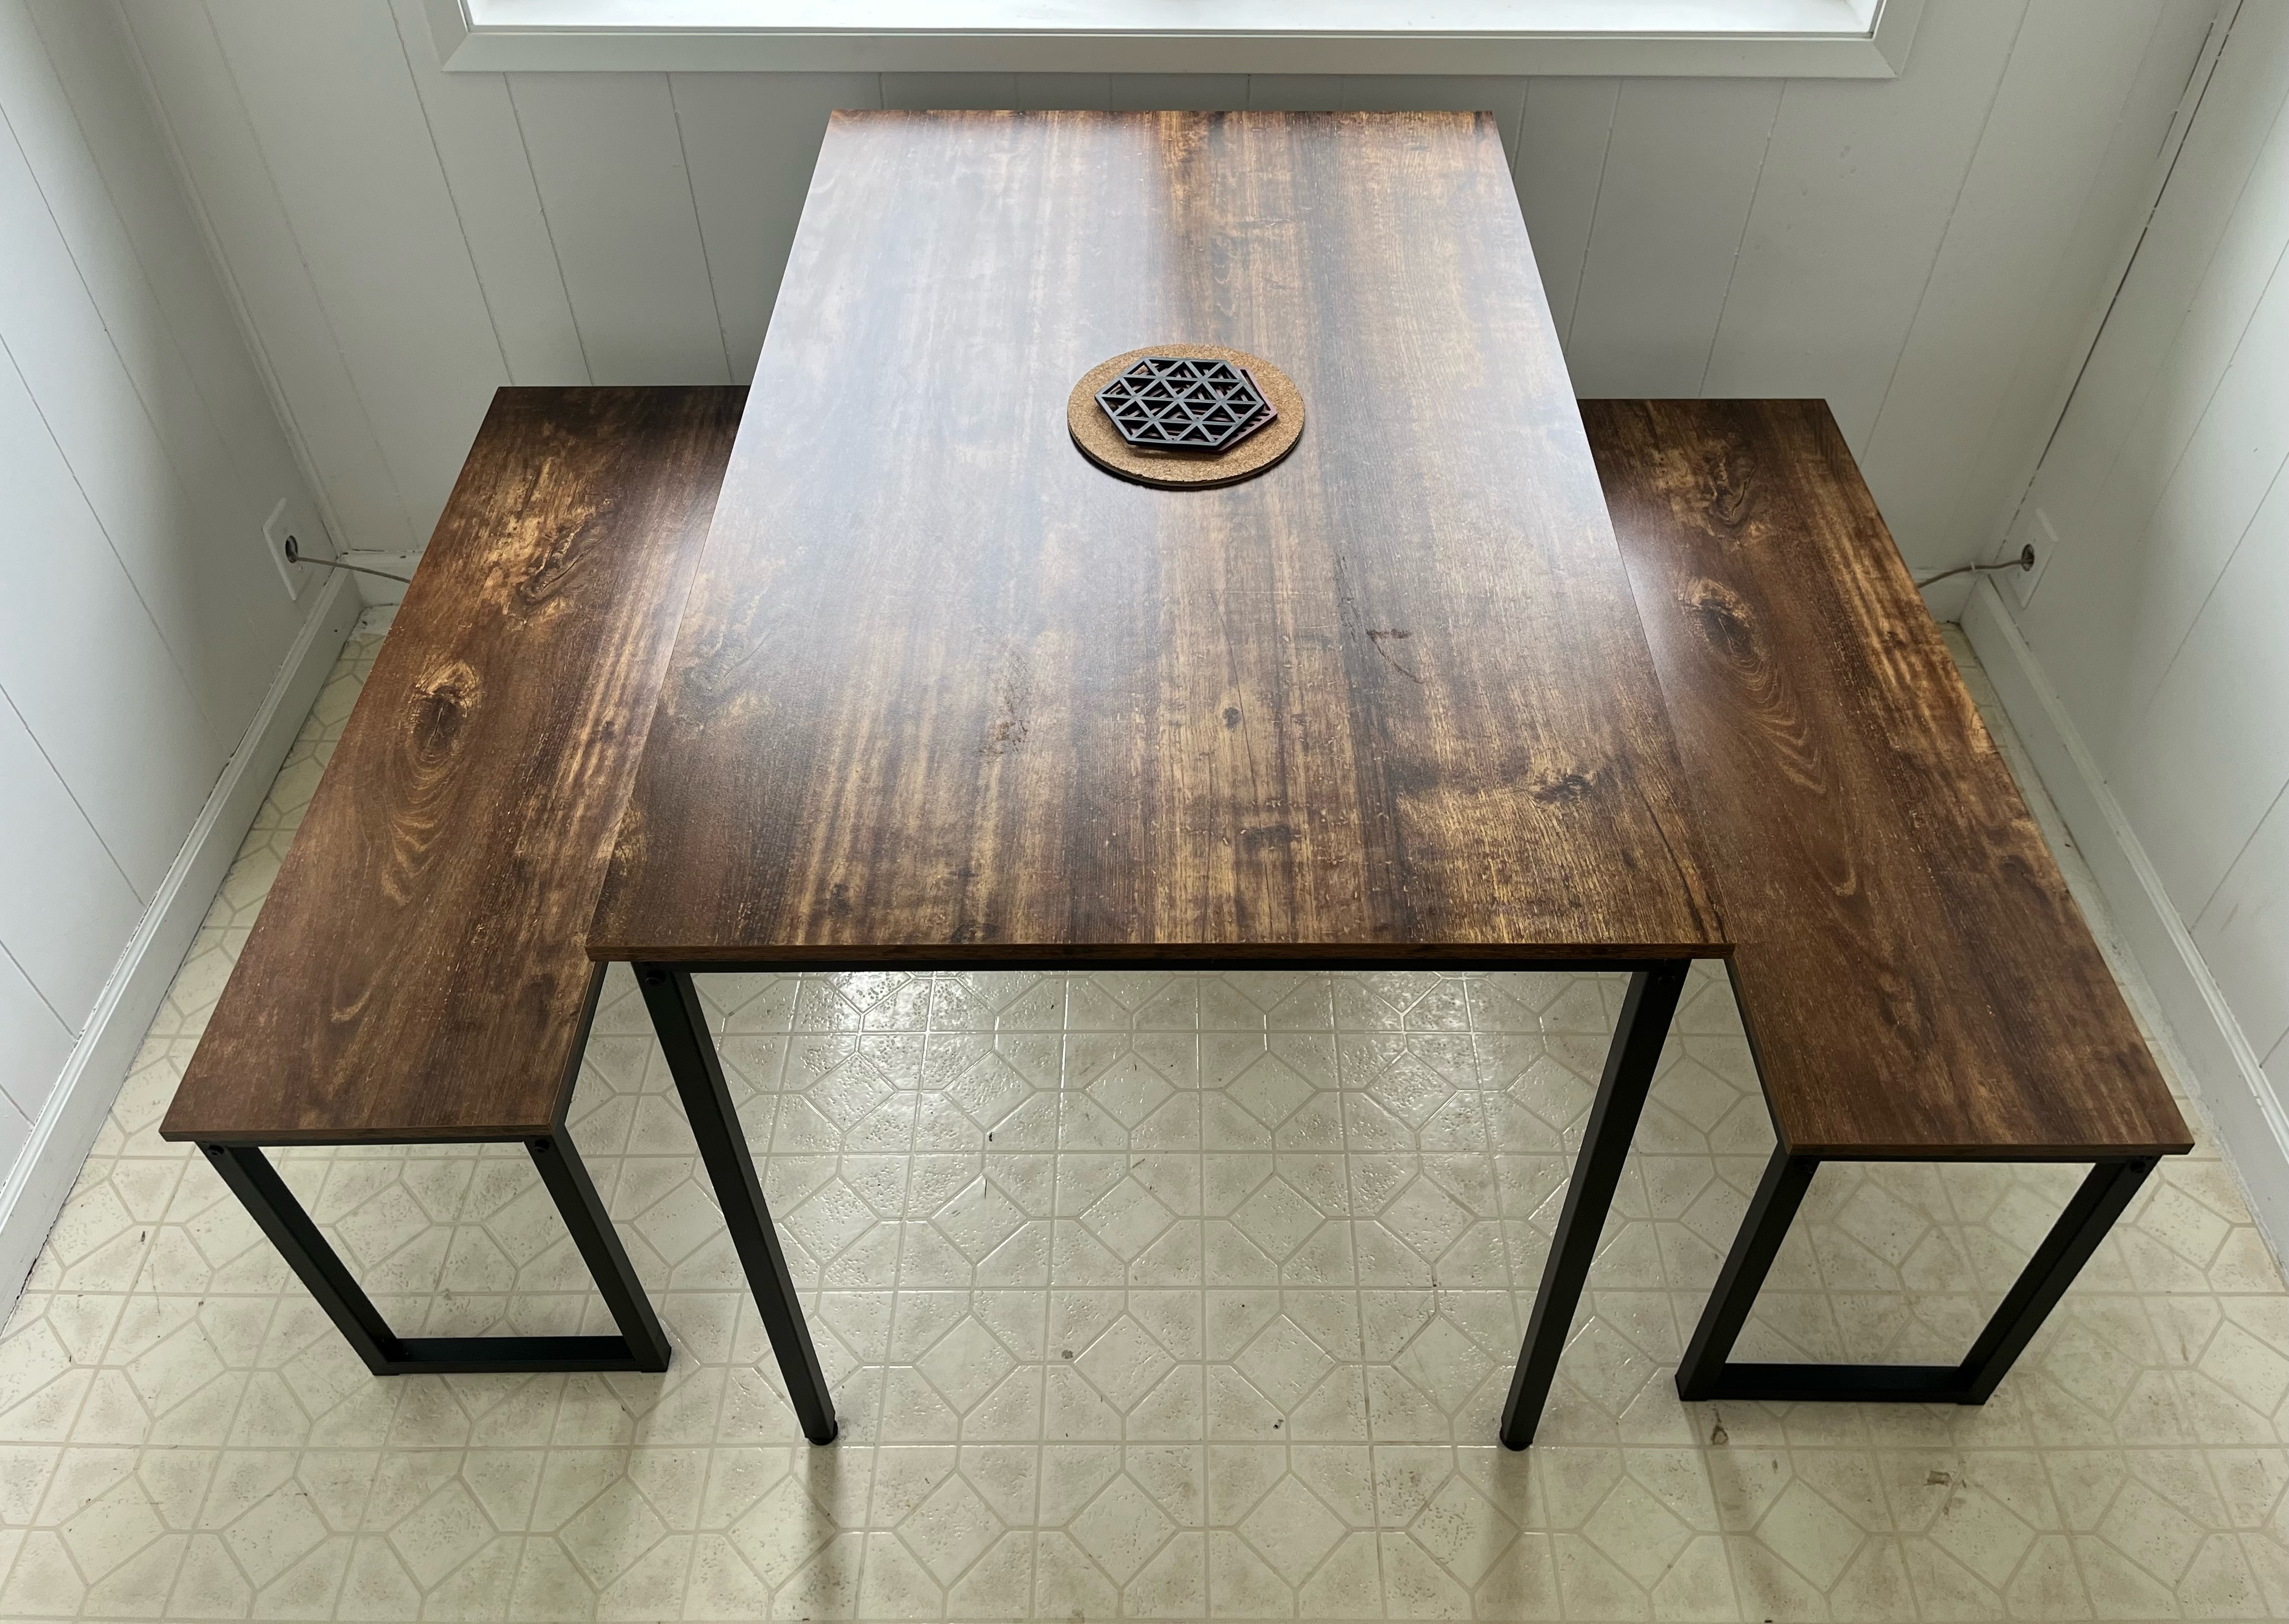 The Best Compact Kitchen Table For Small Spaces